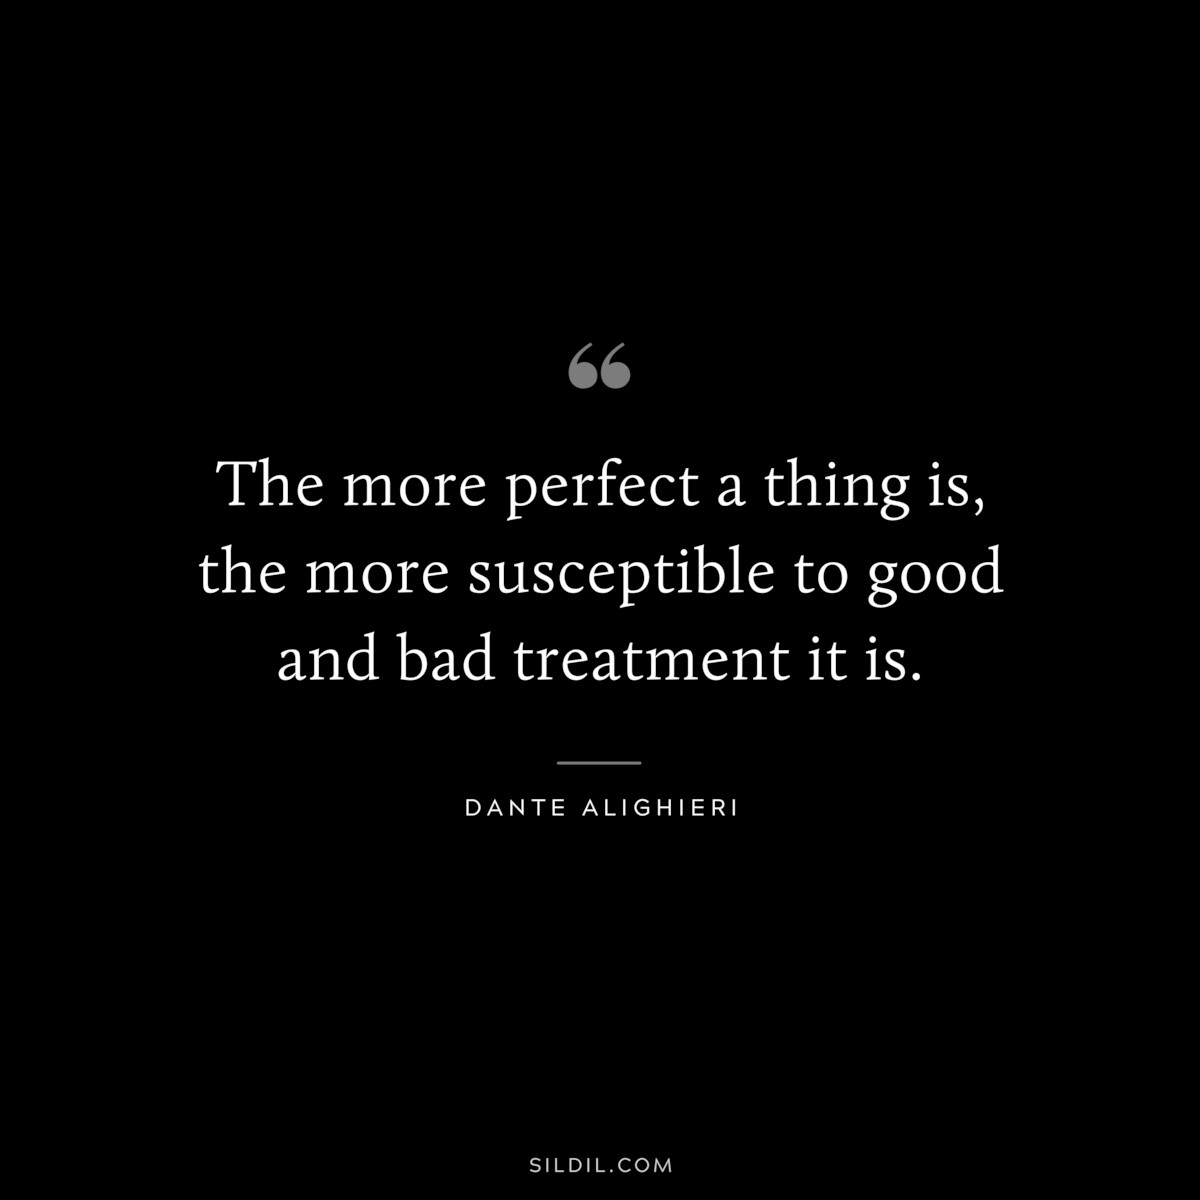 The more perfect a thing is, the more susceptible to good and bad treatment it is. ― Dante Alighieri